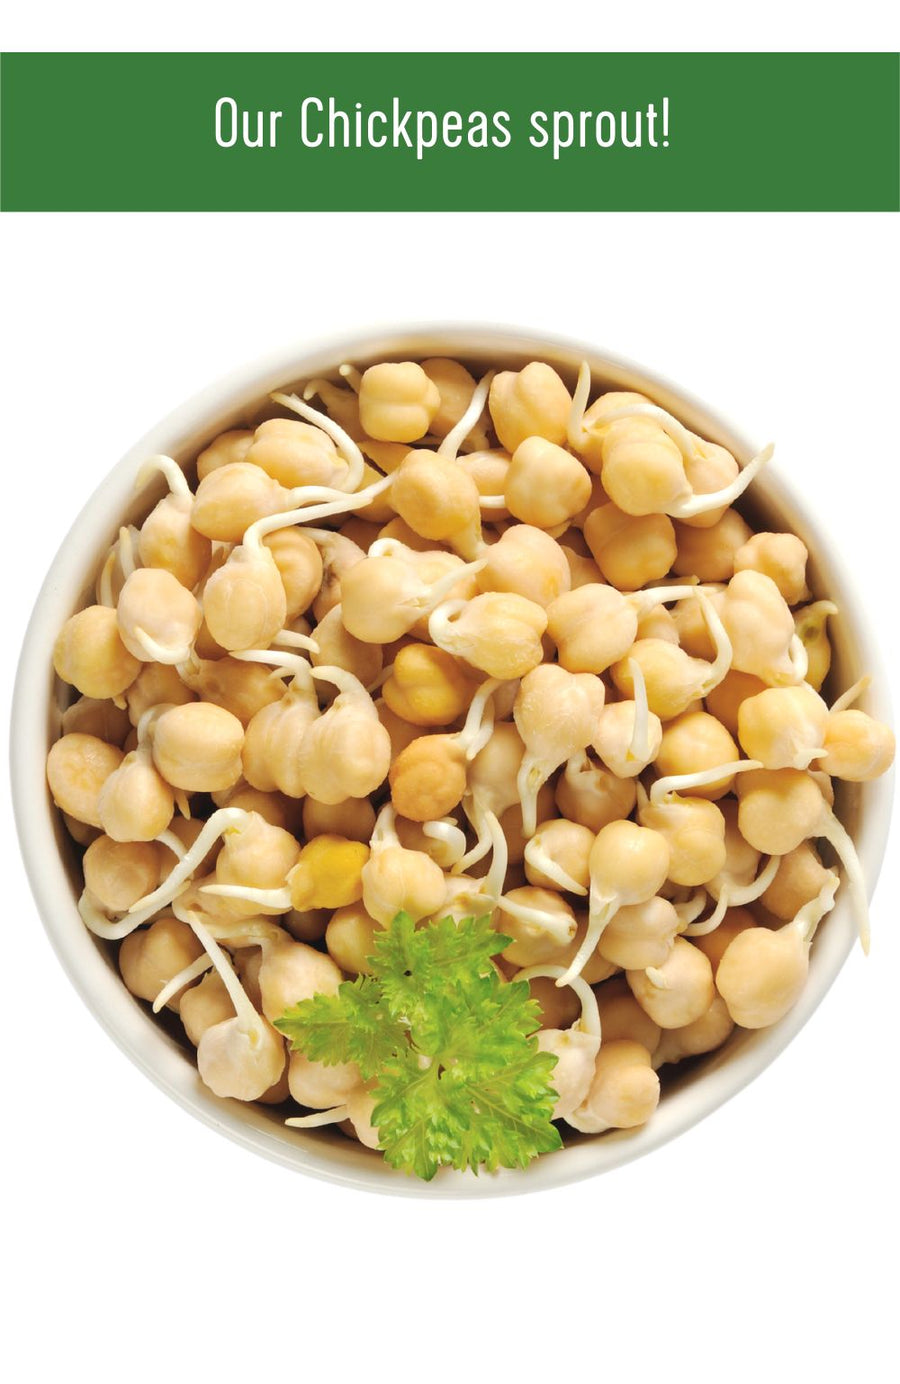 How to Sprout Washington State Grown Garbanzo Beans and Green Split Peas